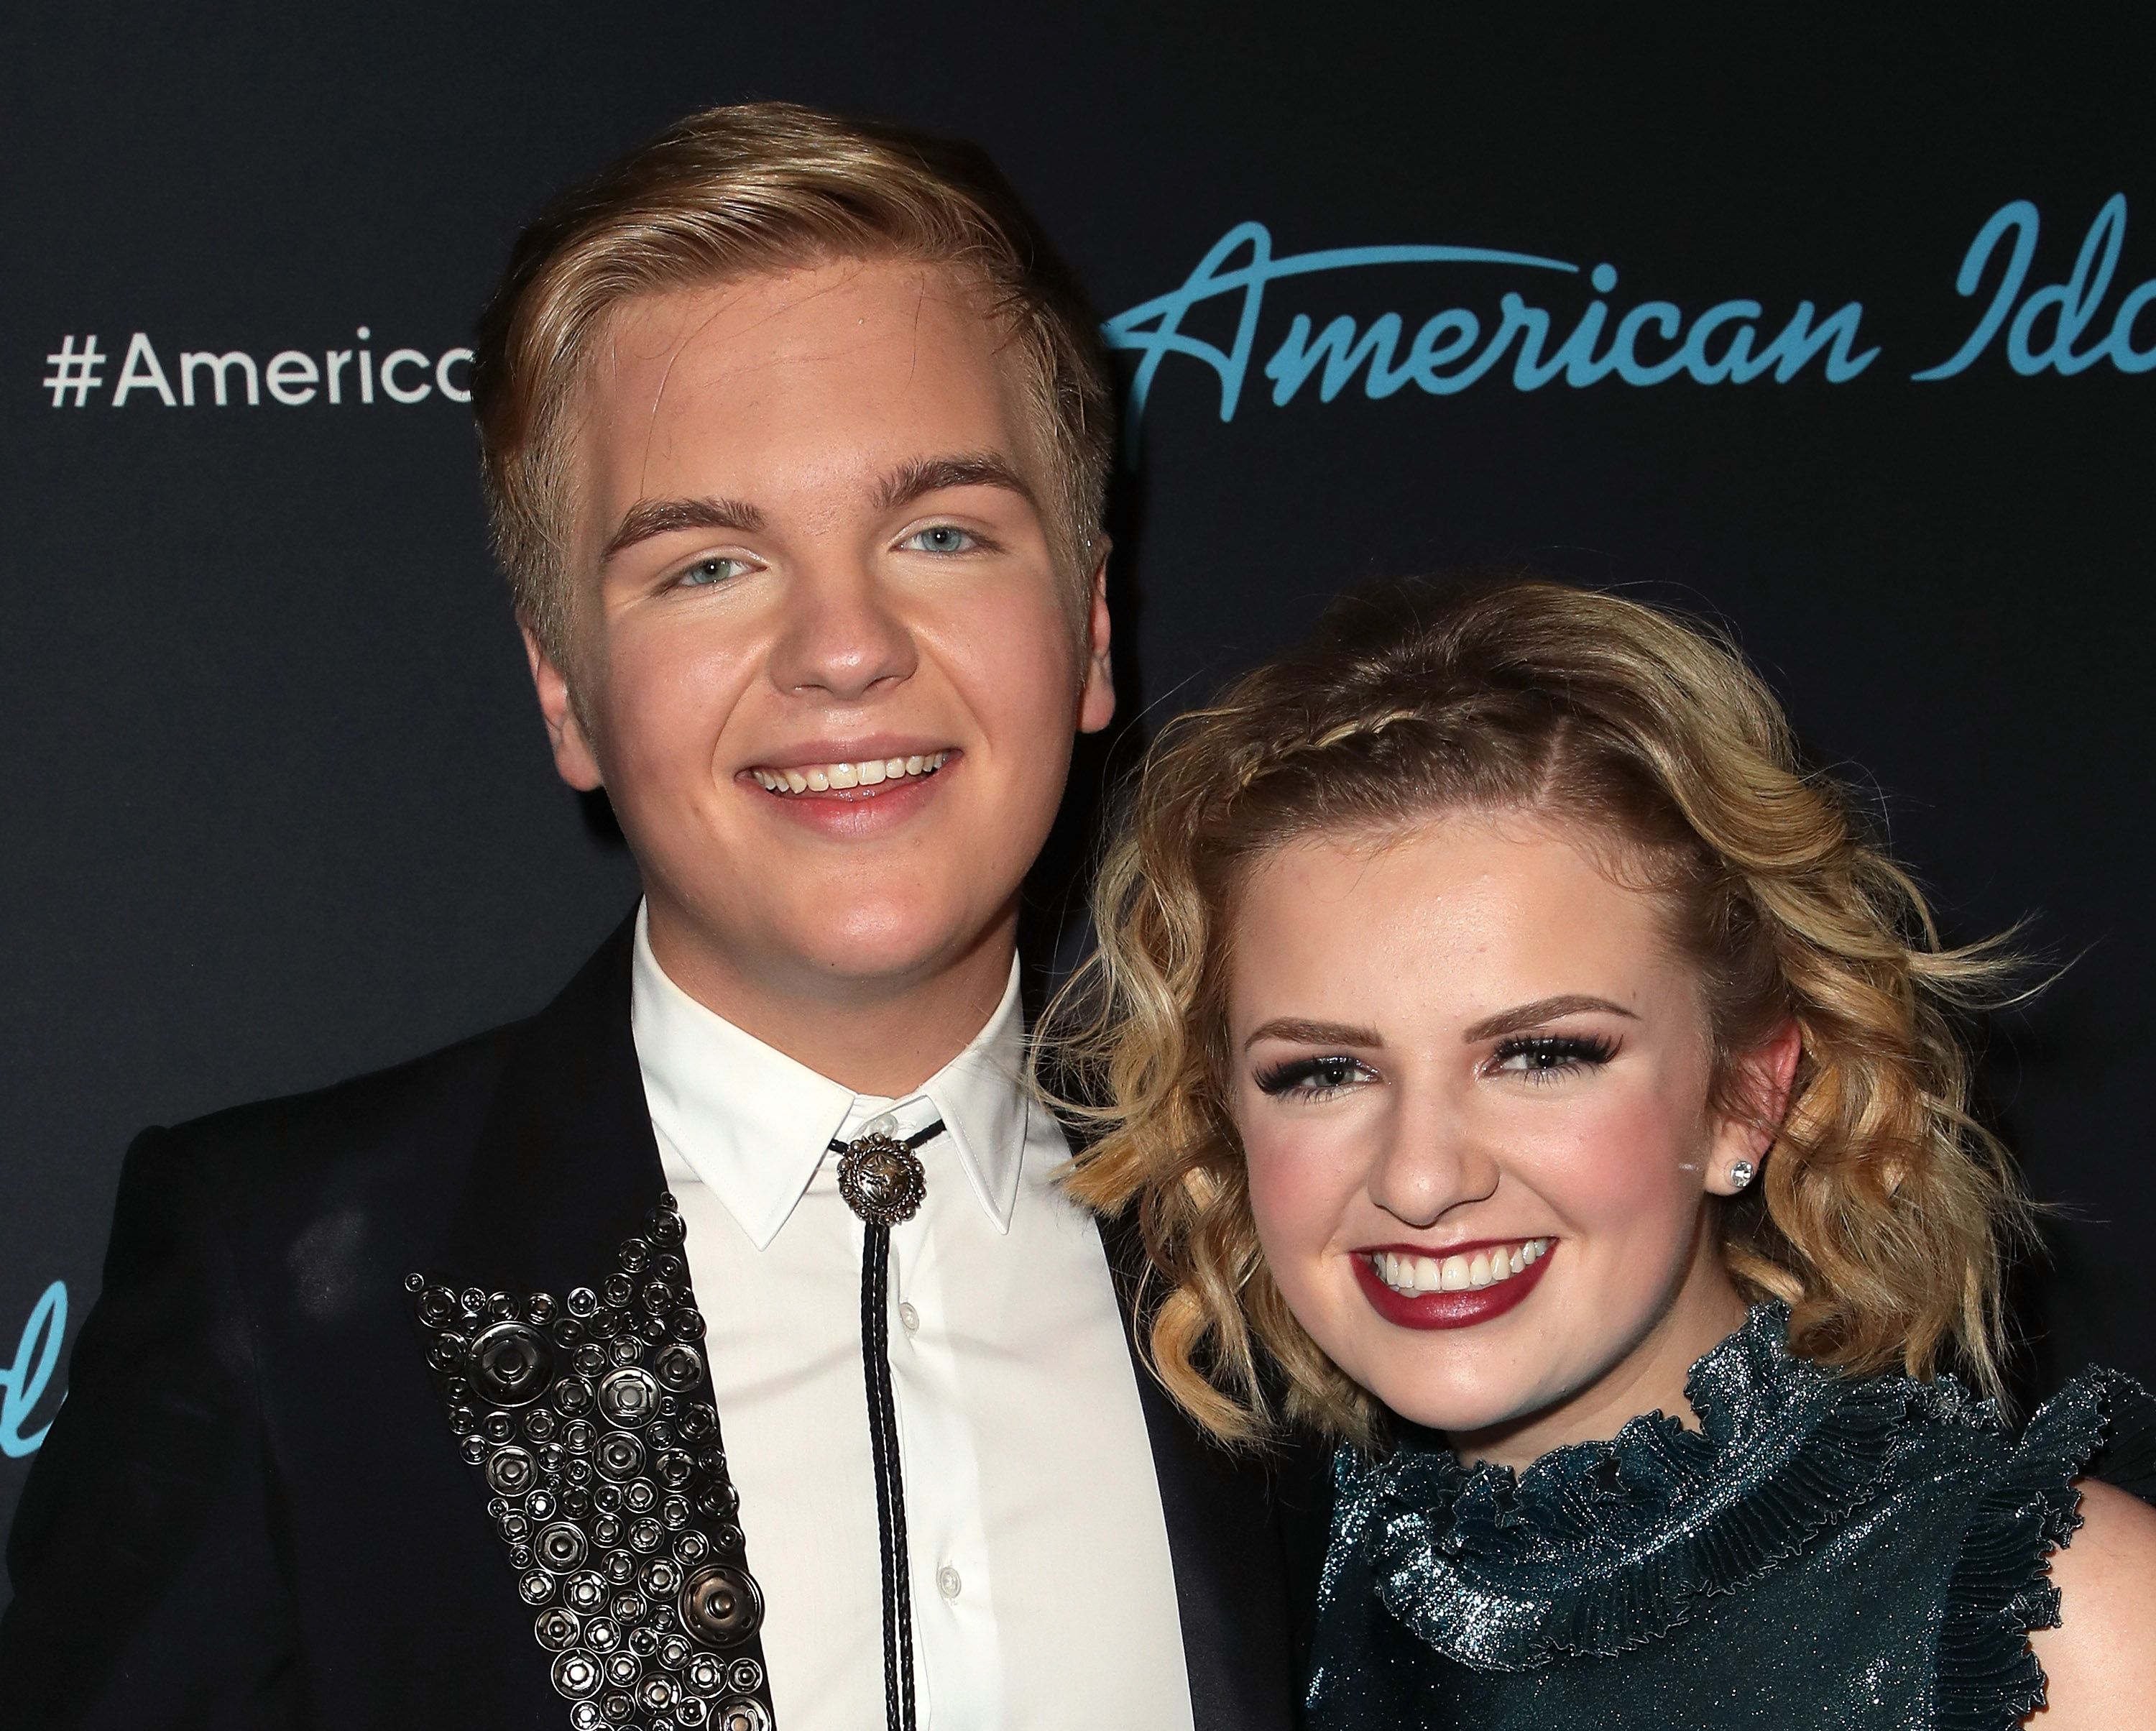 American Idol' Finalists Reveal They're Dating - Caleb Lee Hutchinson  Responds to Maddie Poppe's Win